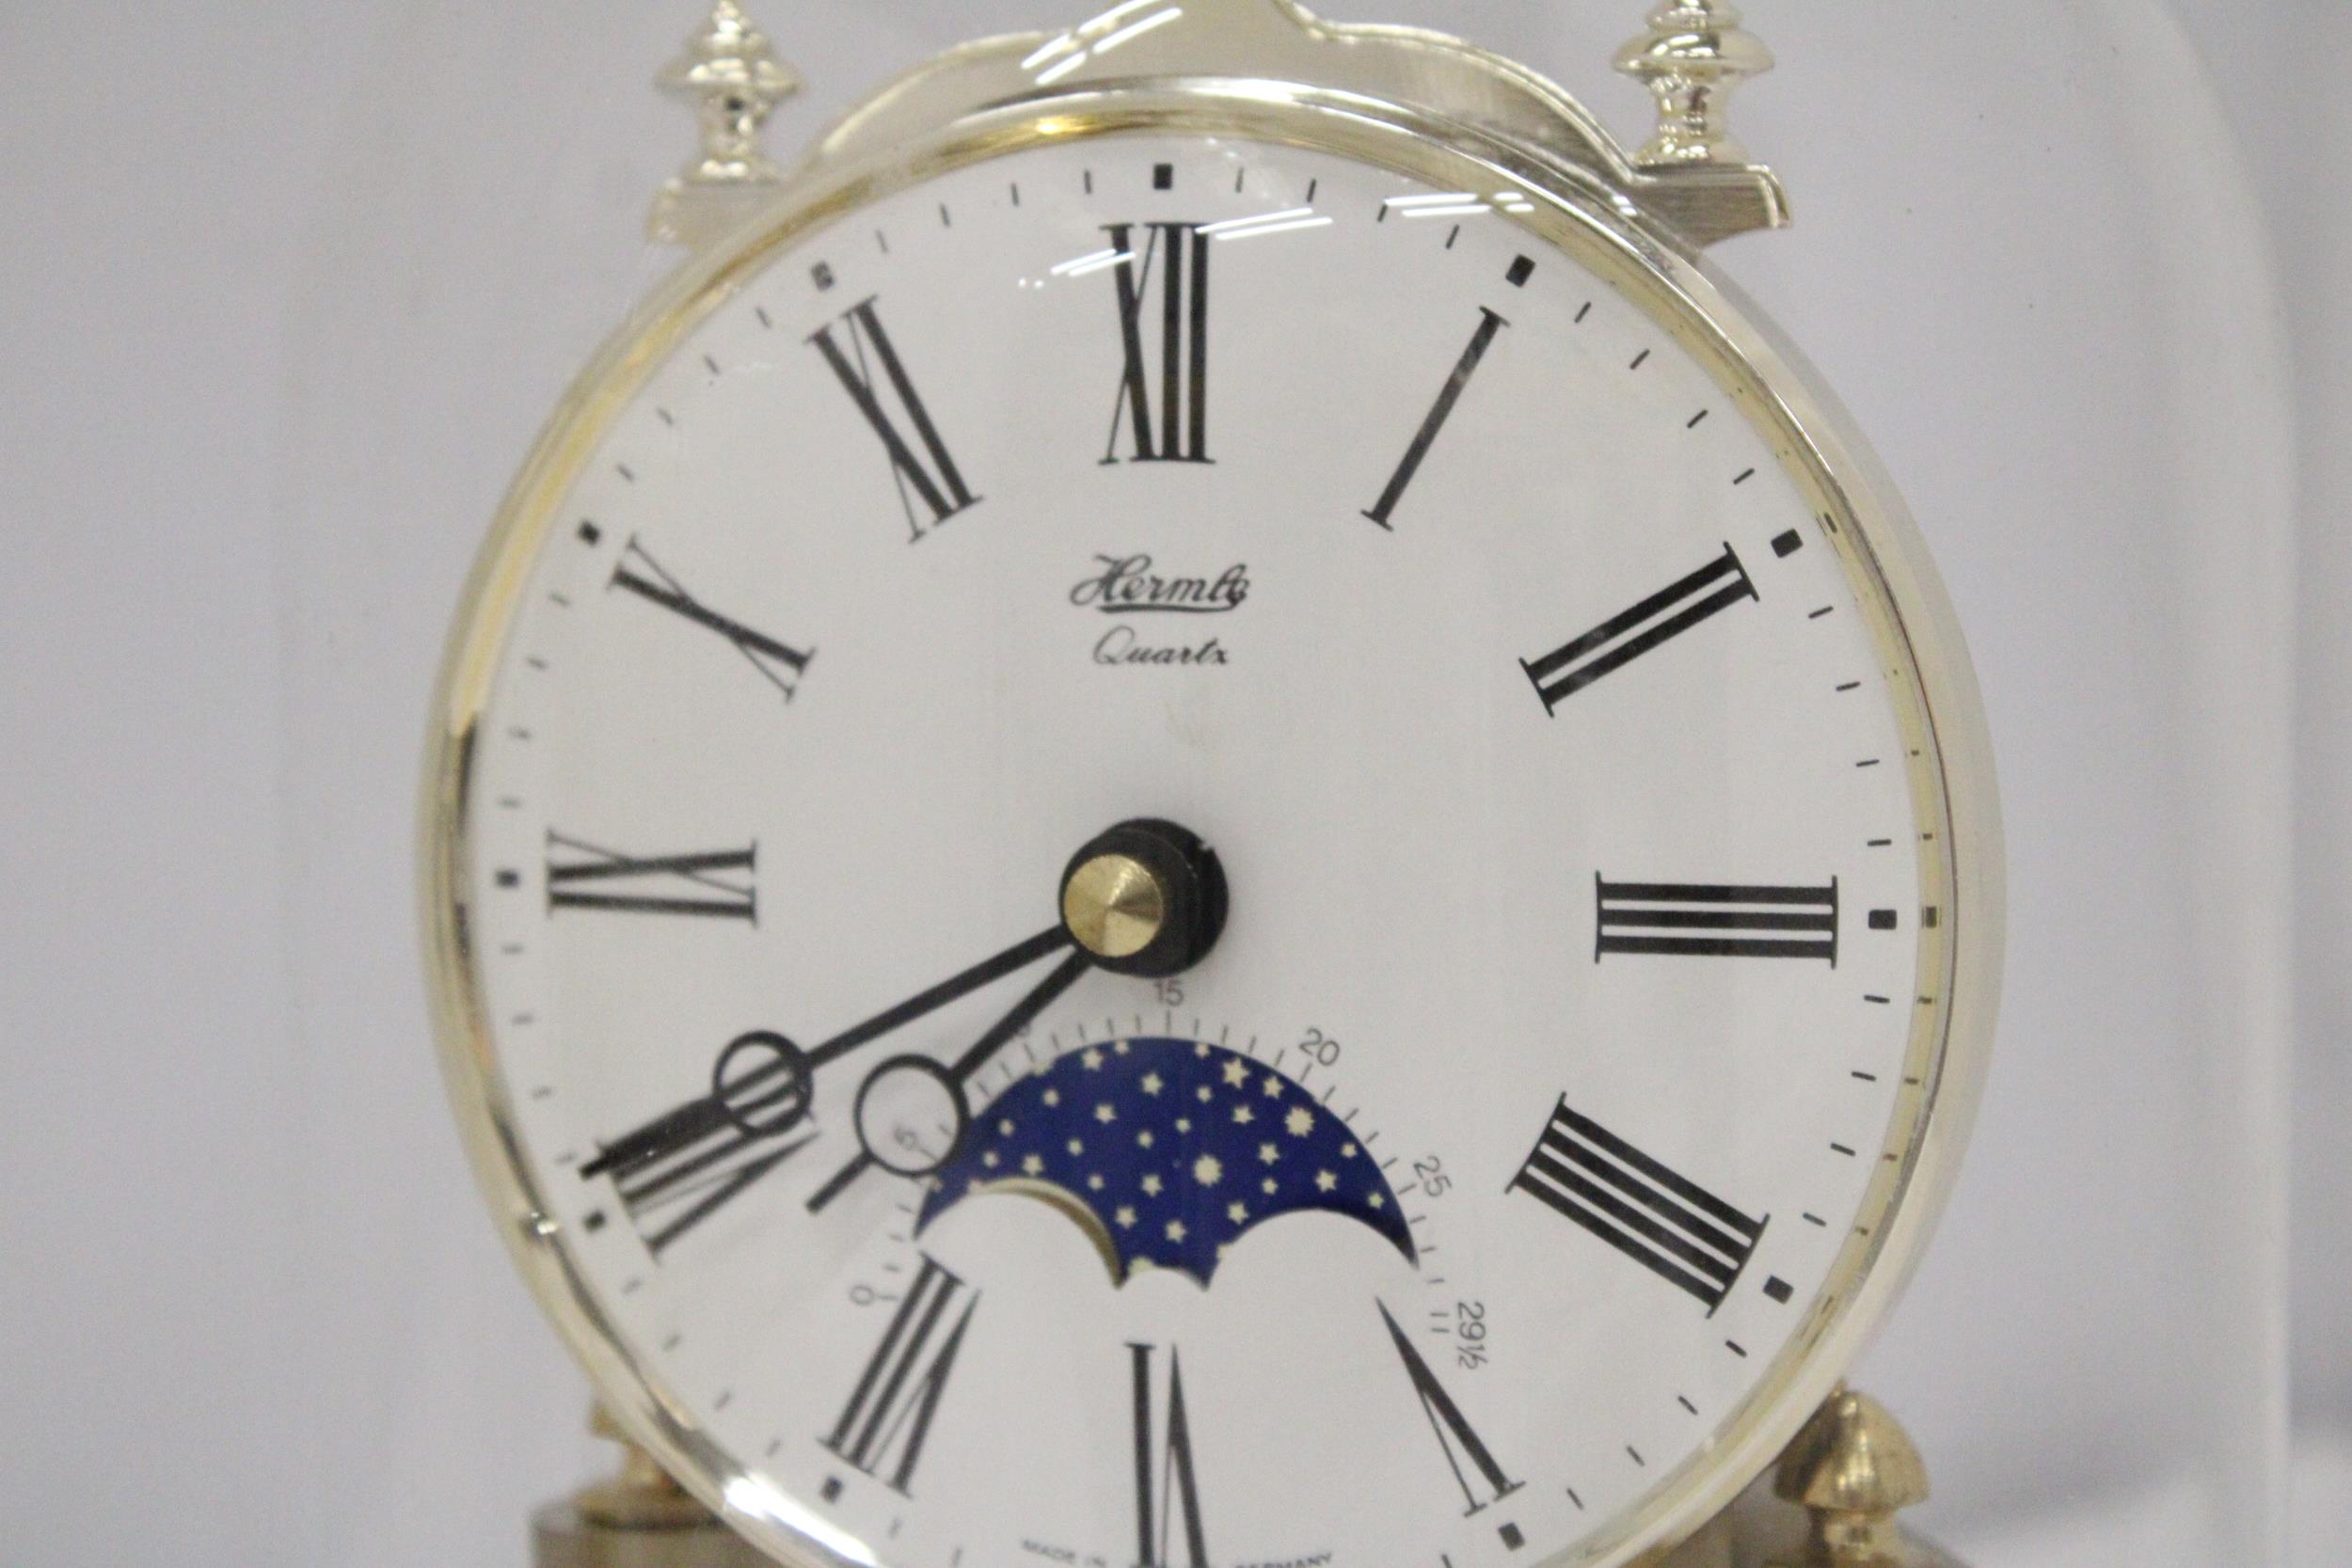 TWO BRASS ANNIVERSARY CLOCKS WITH GLASS DOMES - Image 5 of 6